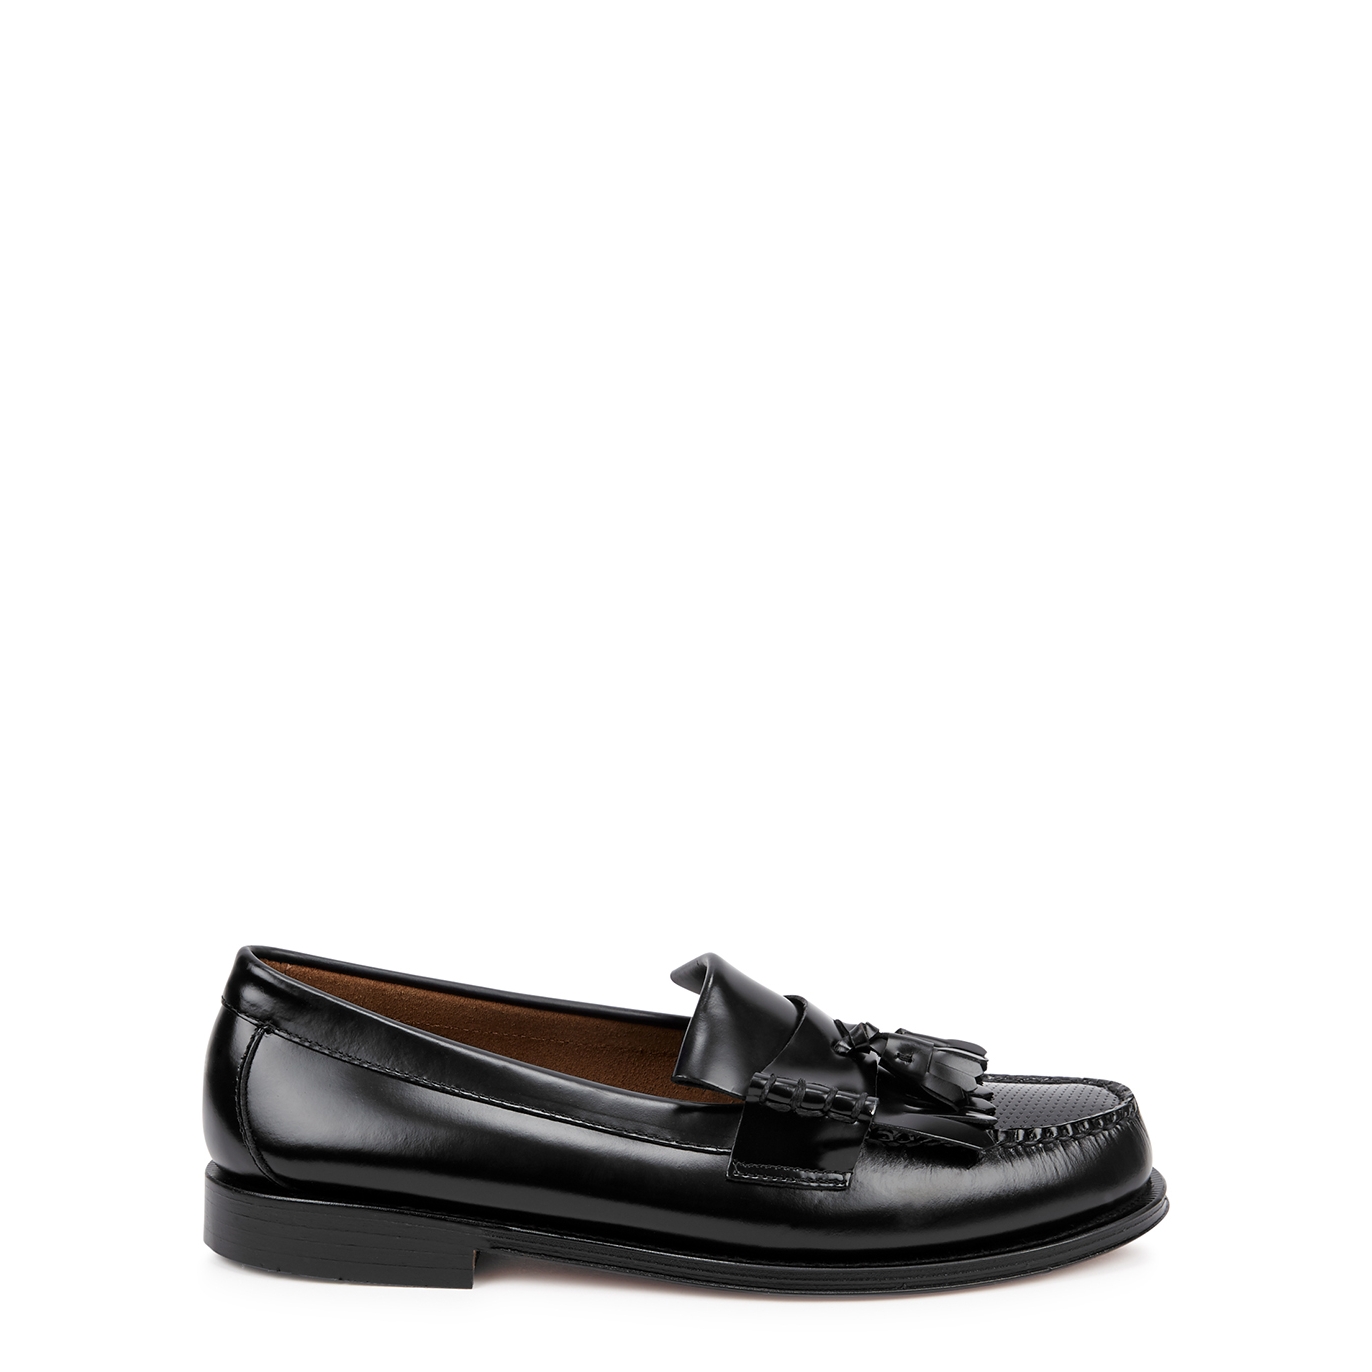 G.H Bass & Co Kiltie Black Tasselled Leather Loafers - 10